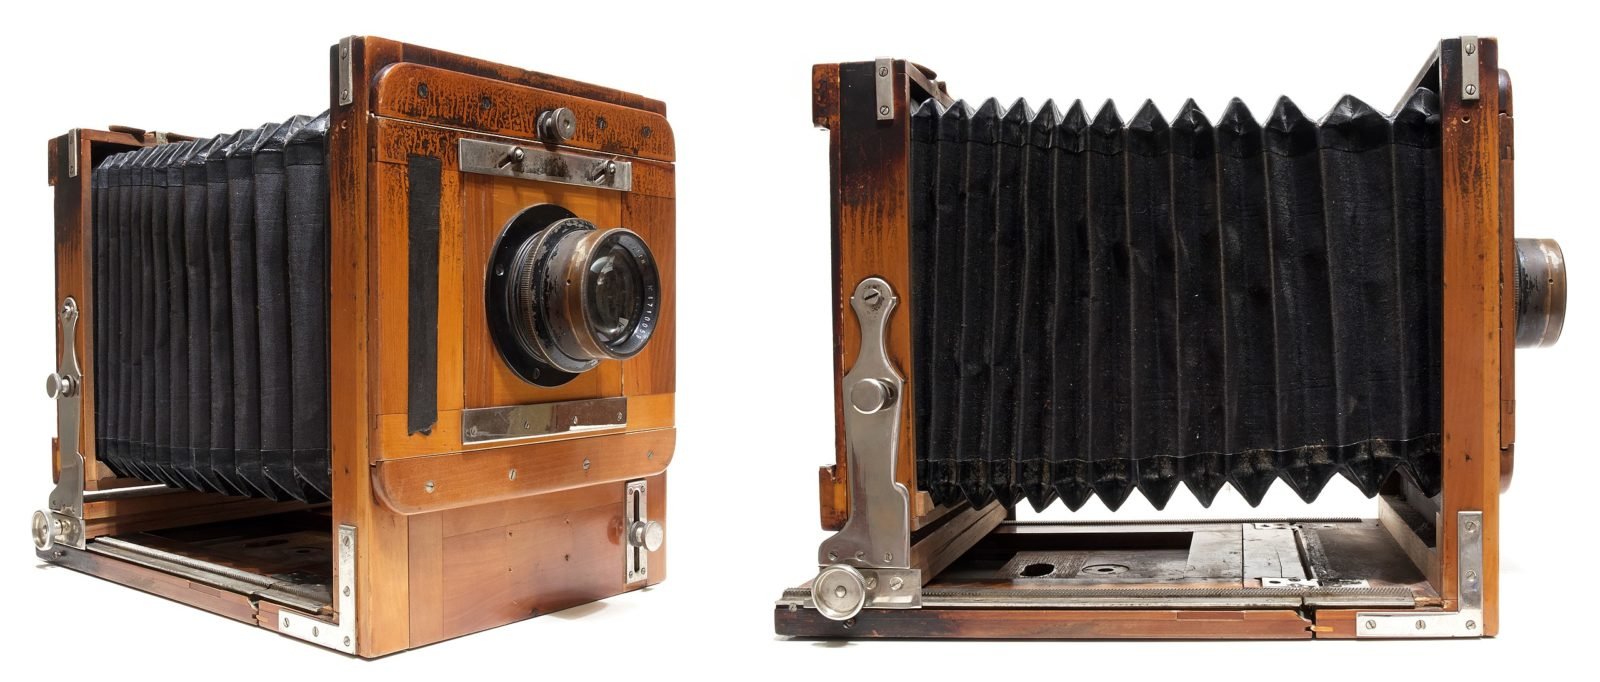 A Brief History of Photography and the Camera